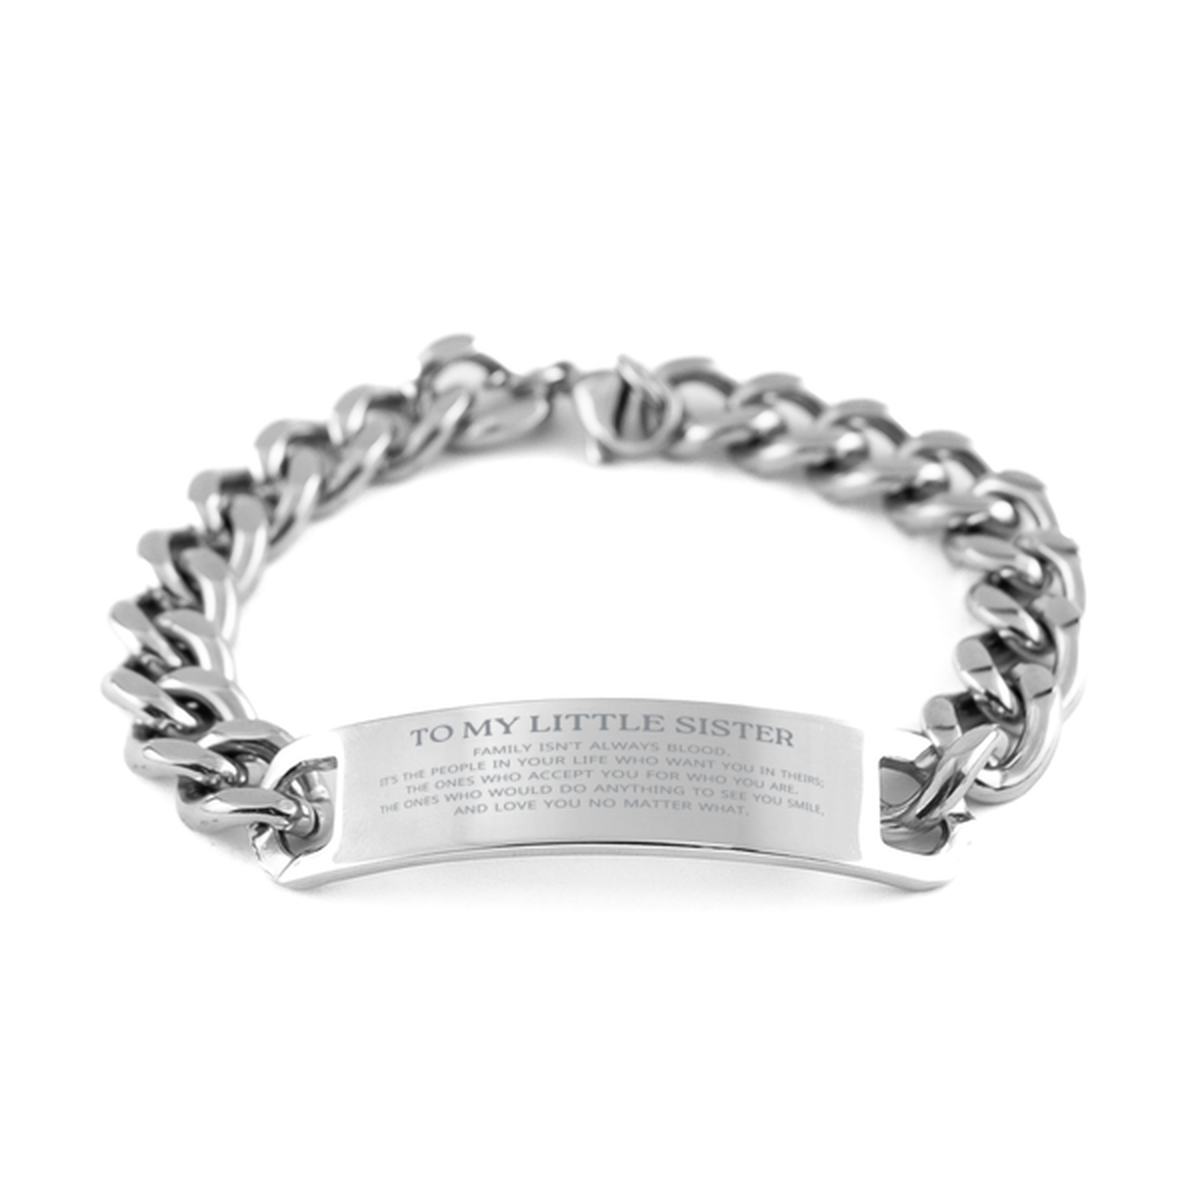 To My Little Sister Gifts, Family isn't always blood, Little Sister Cuban Chain Stainless Steel Bracelet, Birthday Christmas Unique Present For Little Sister